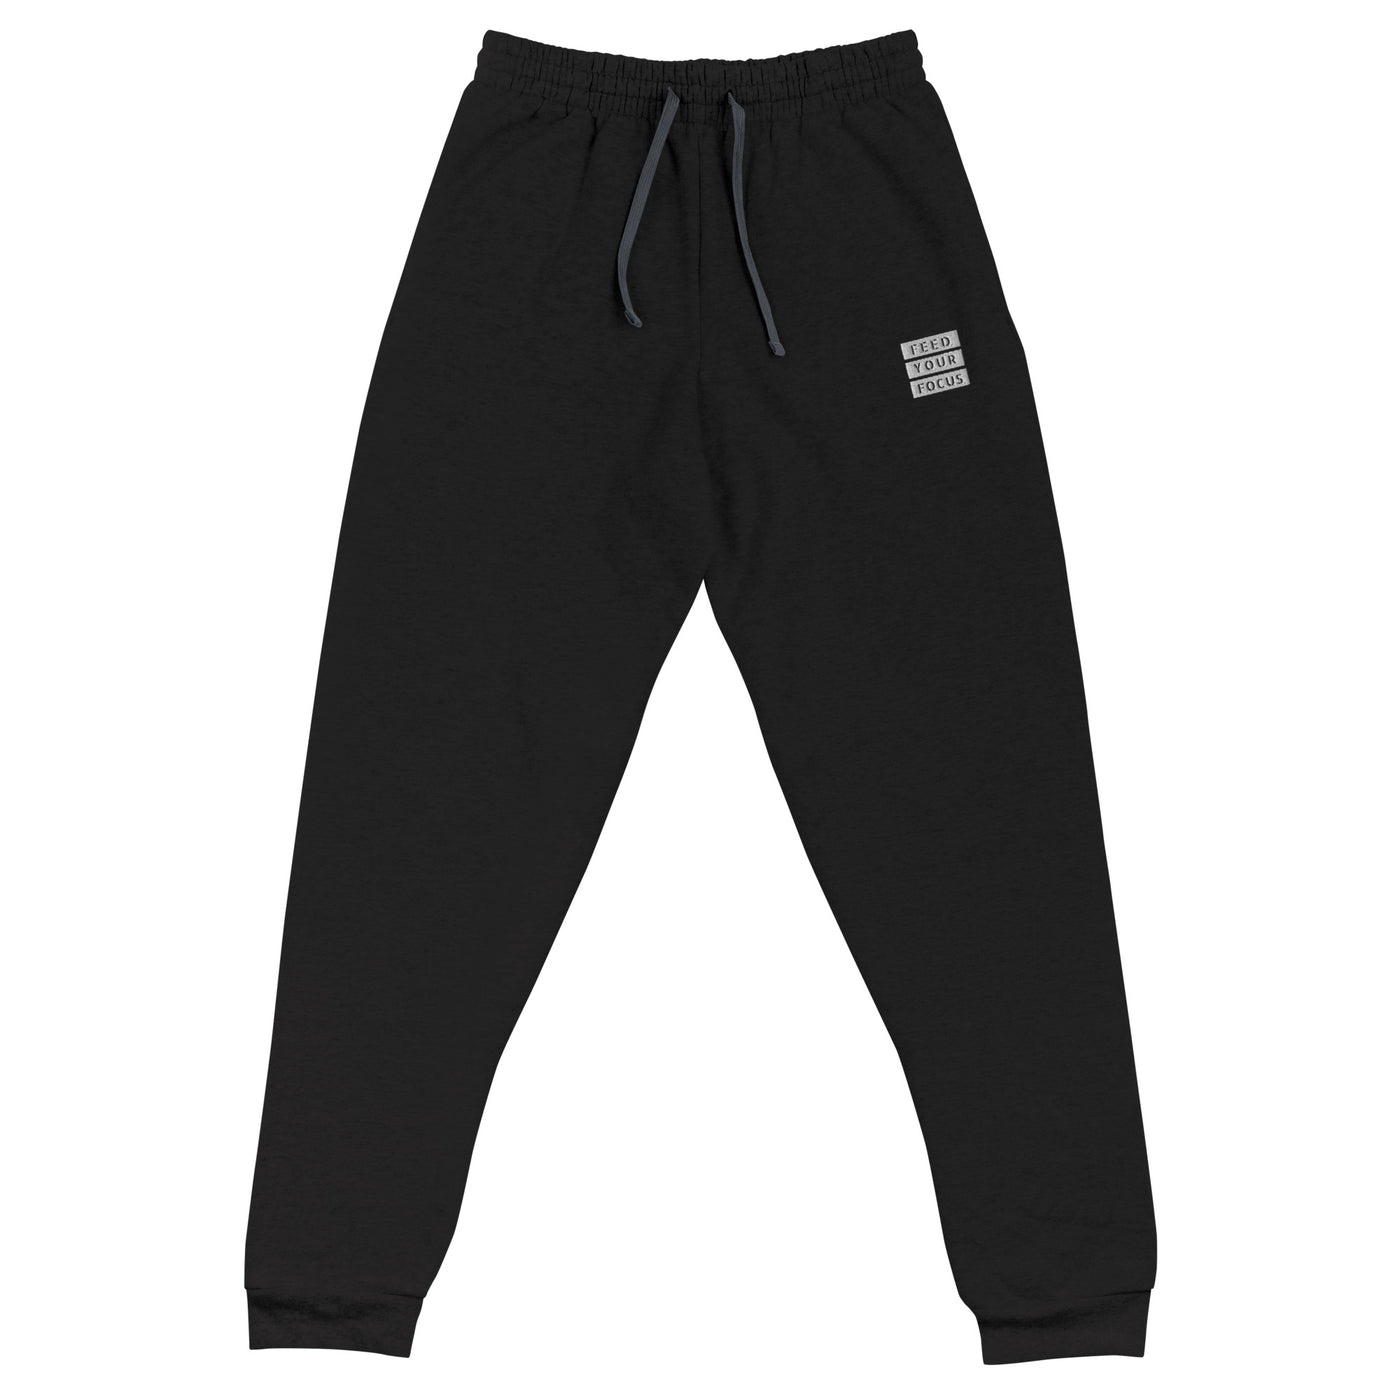 Men's Black Embroidered Joggers - Feed Your Focus